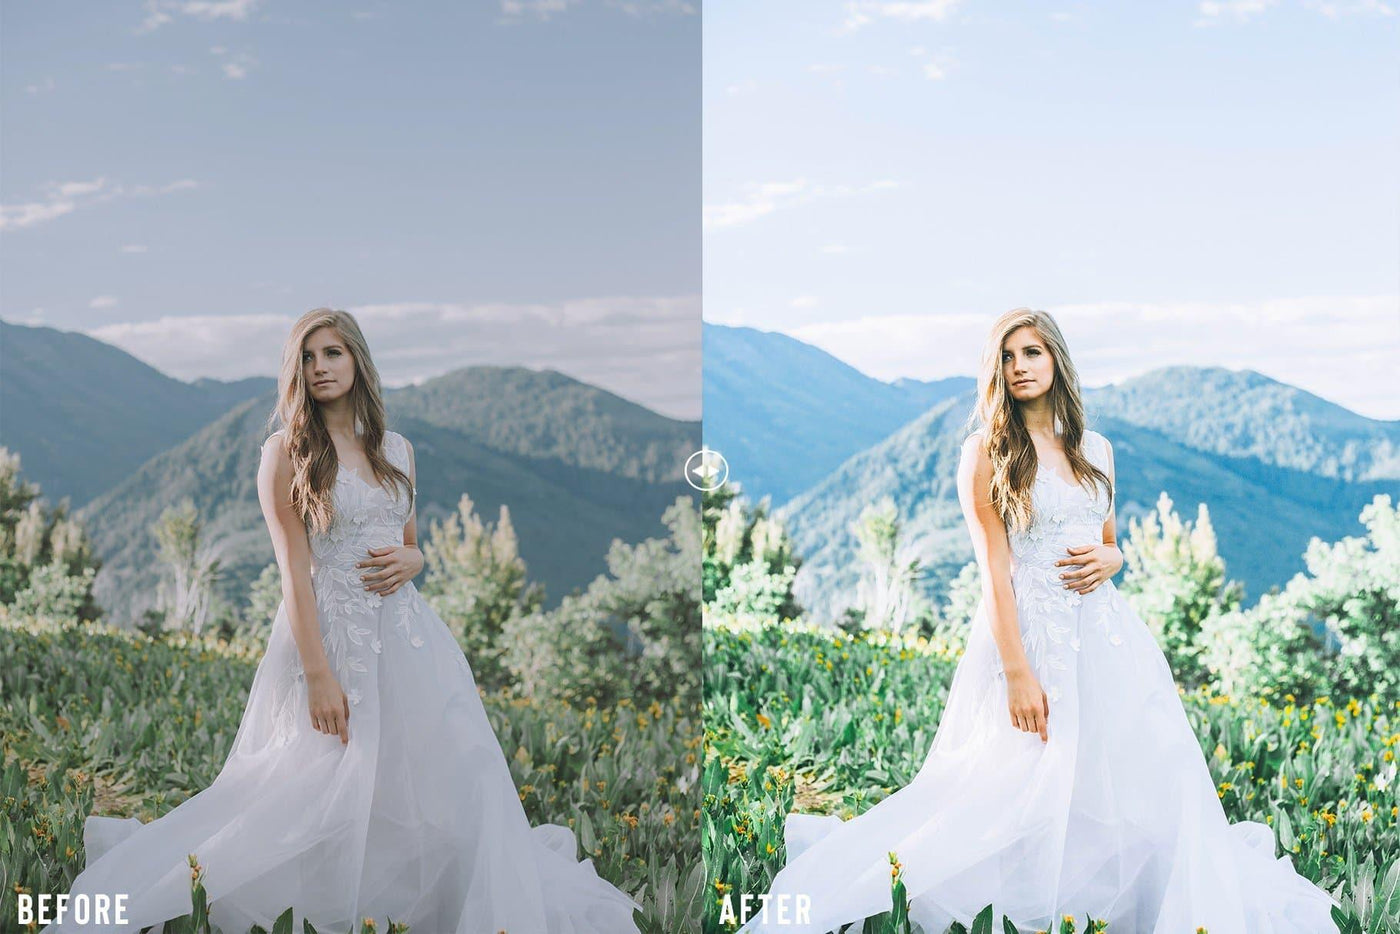 Bright And Airy Lightroom Mobile Presets - presetsh photography